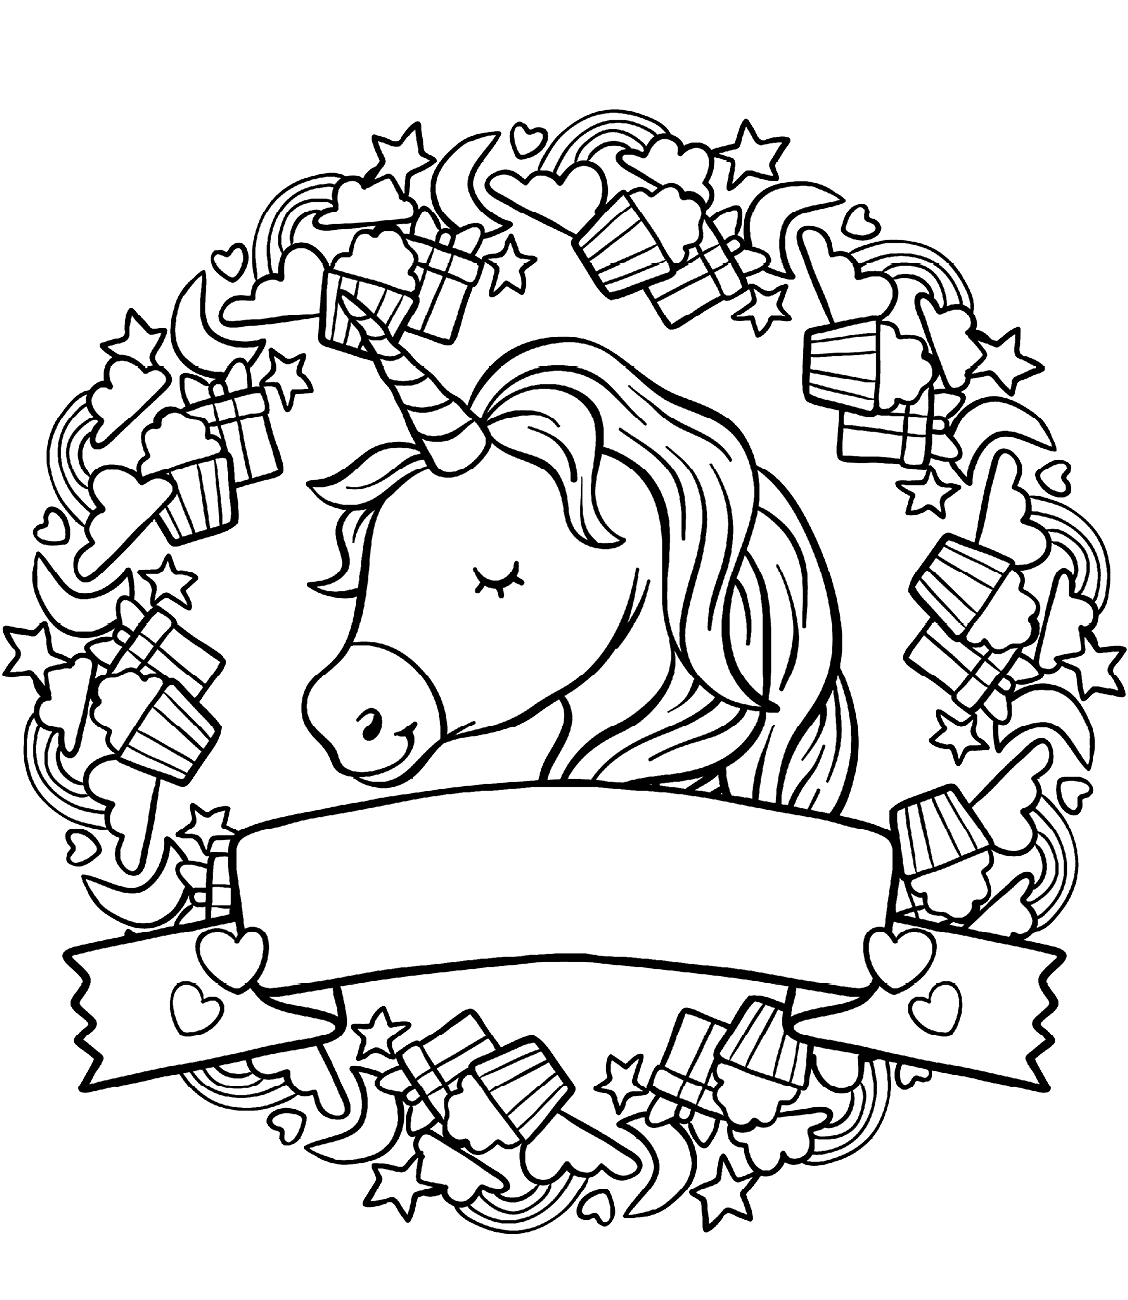 Karkadann In The Night Coloring Page   Free Printable Coloring ...